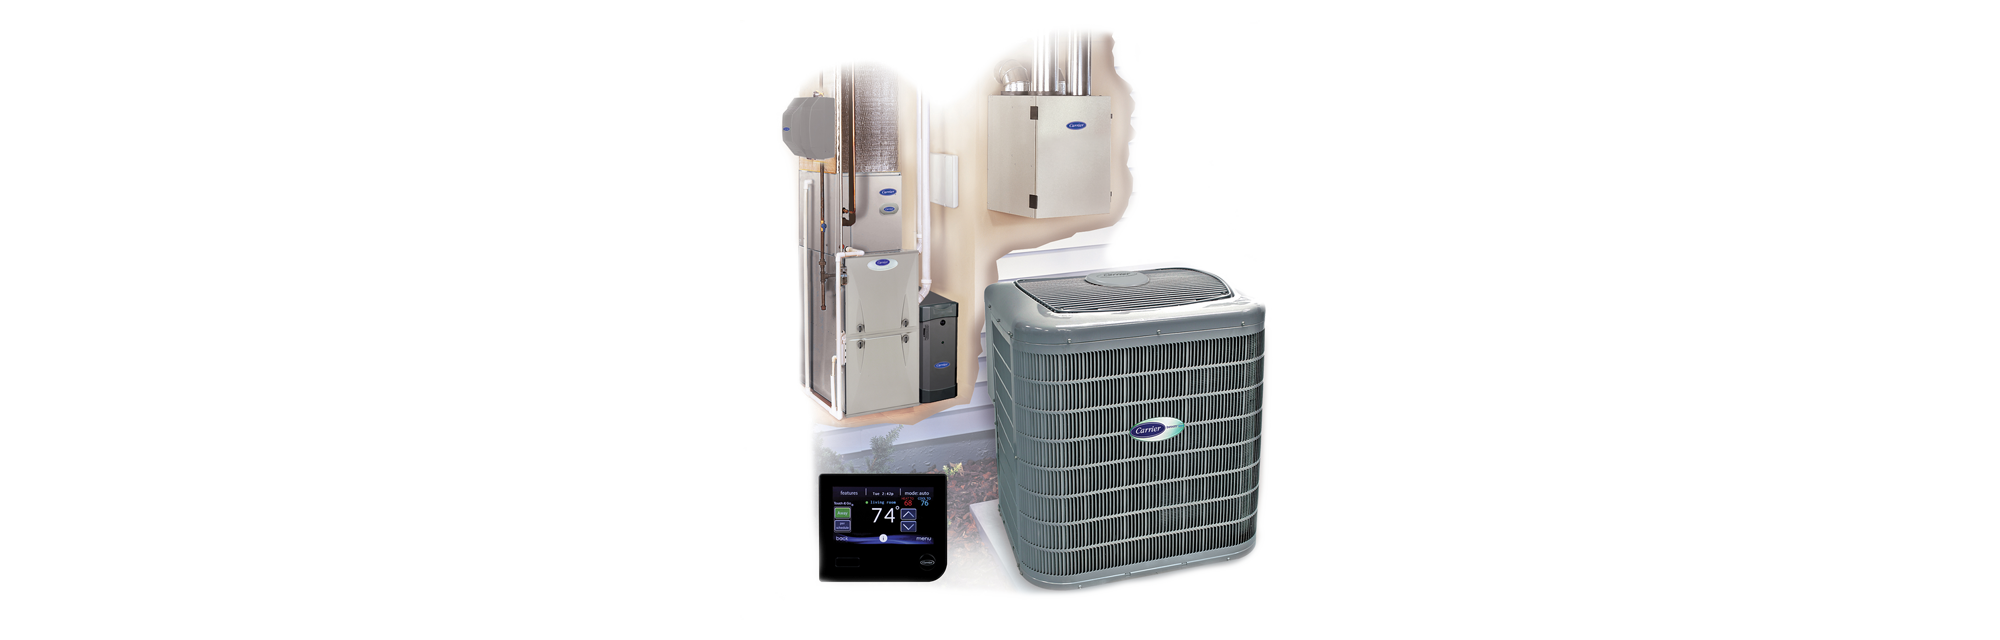 Types of Heating & Cooling Systems Explained | Carrier Residential